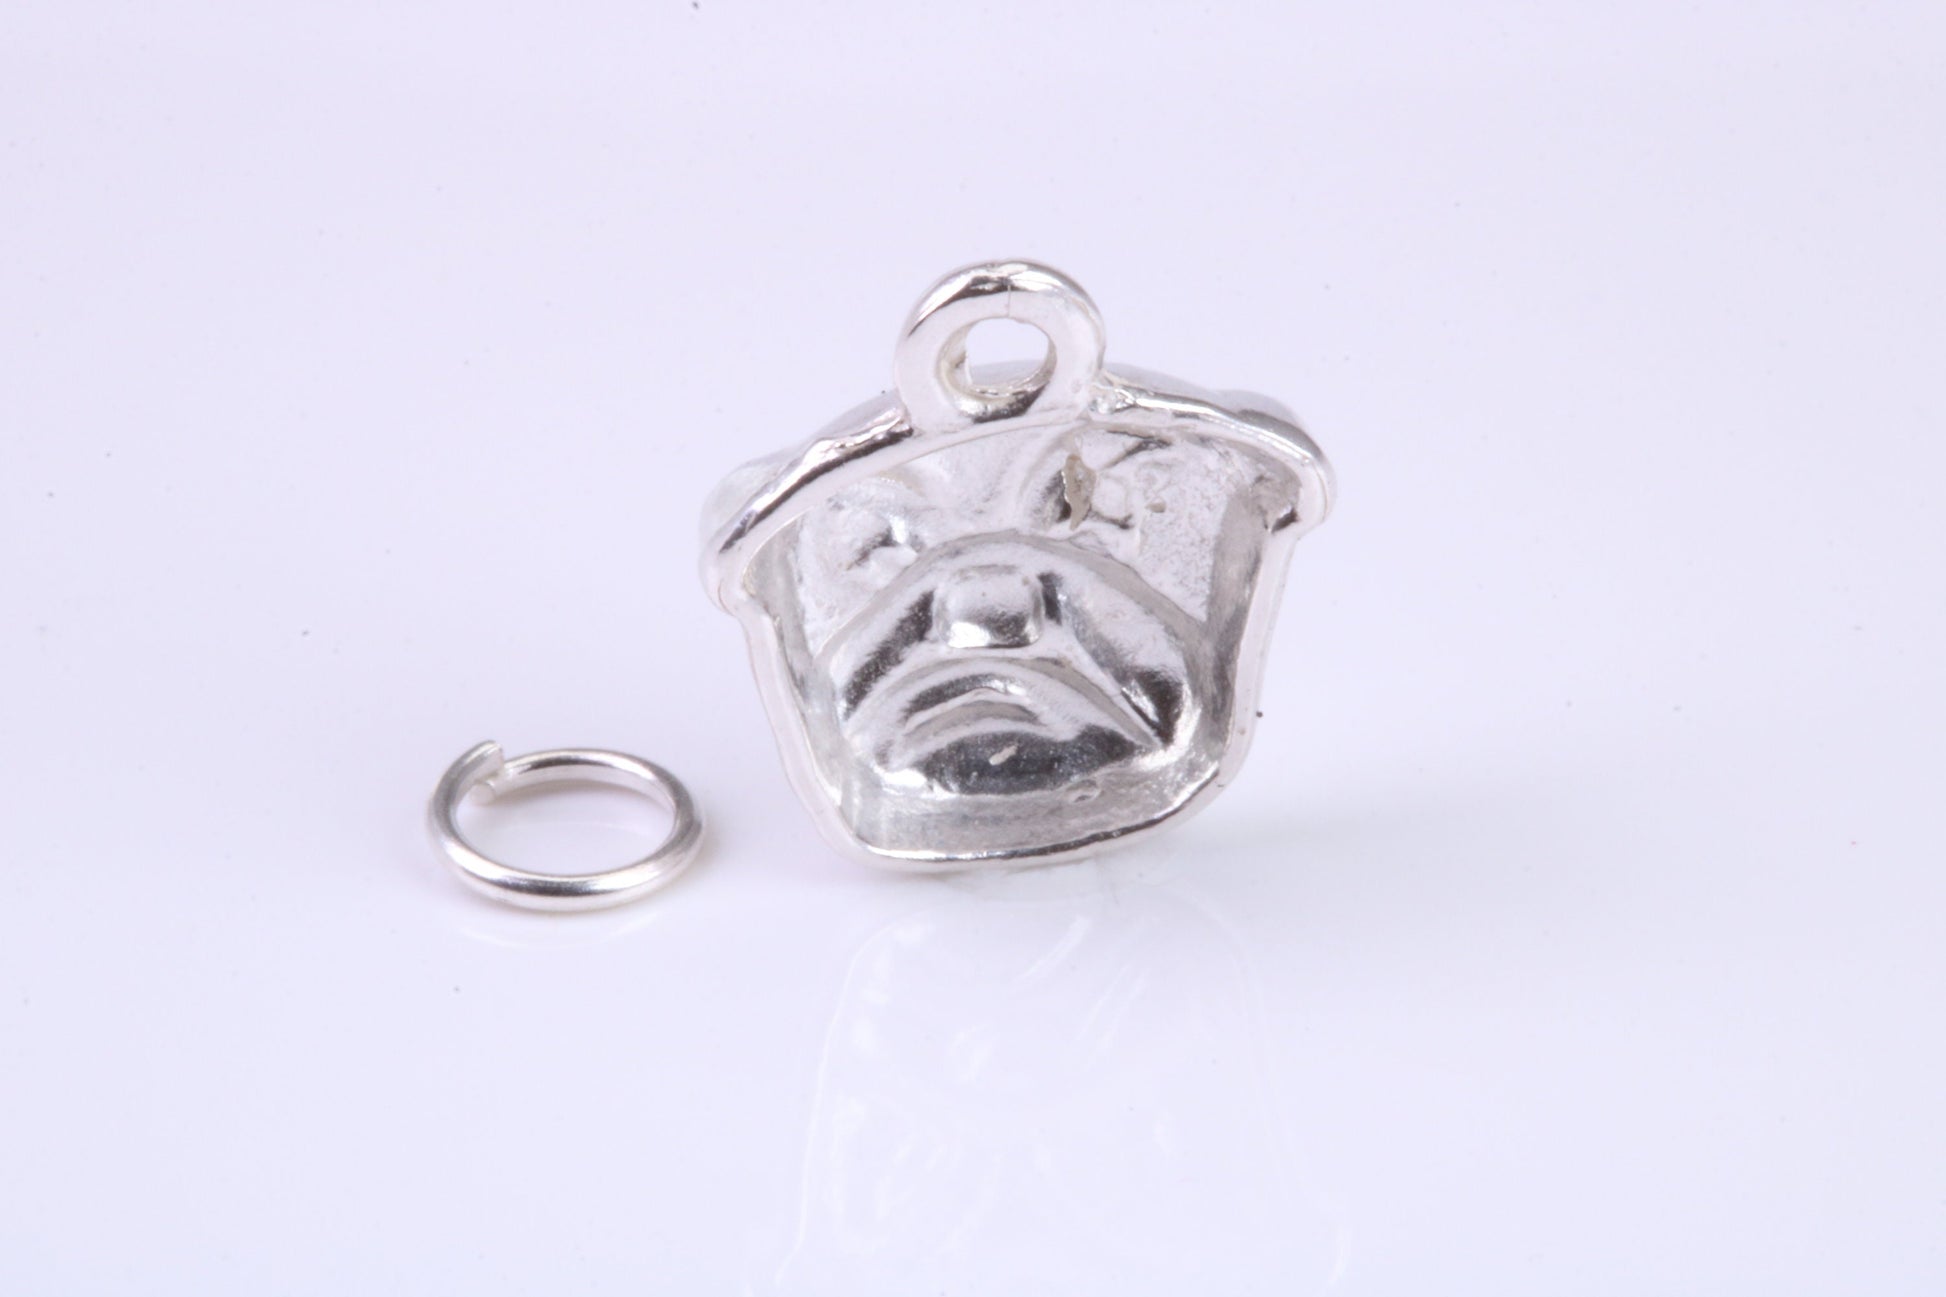 Bull Dog Charm, Traditional Charm, Made from Solid 925 Grade Sterling Silver, Complete with Attachment Link